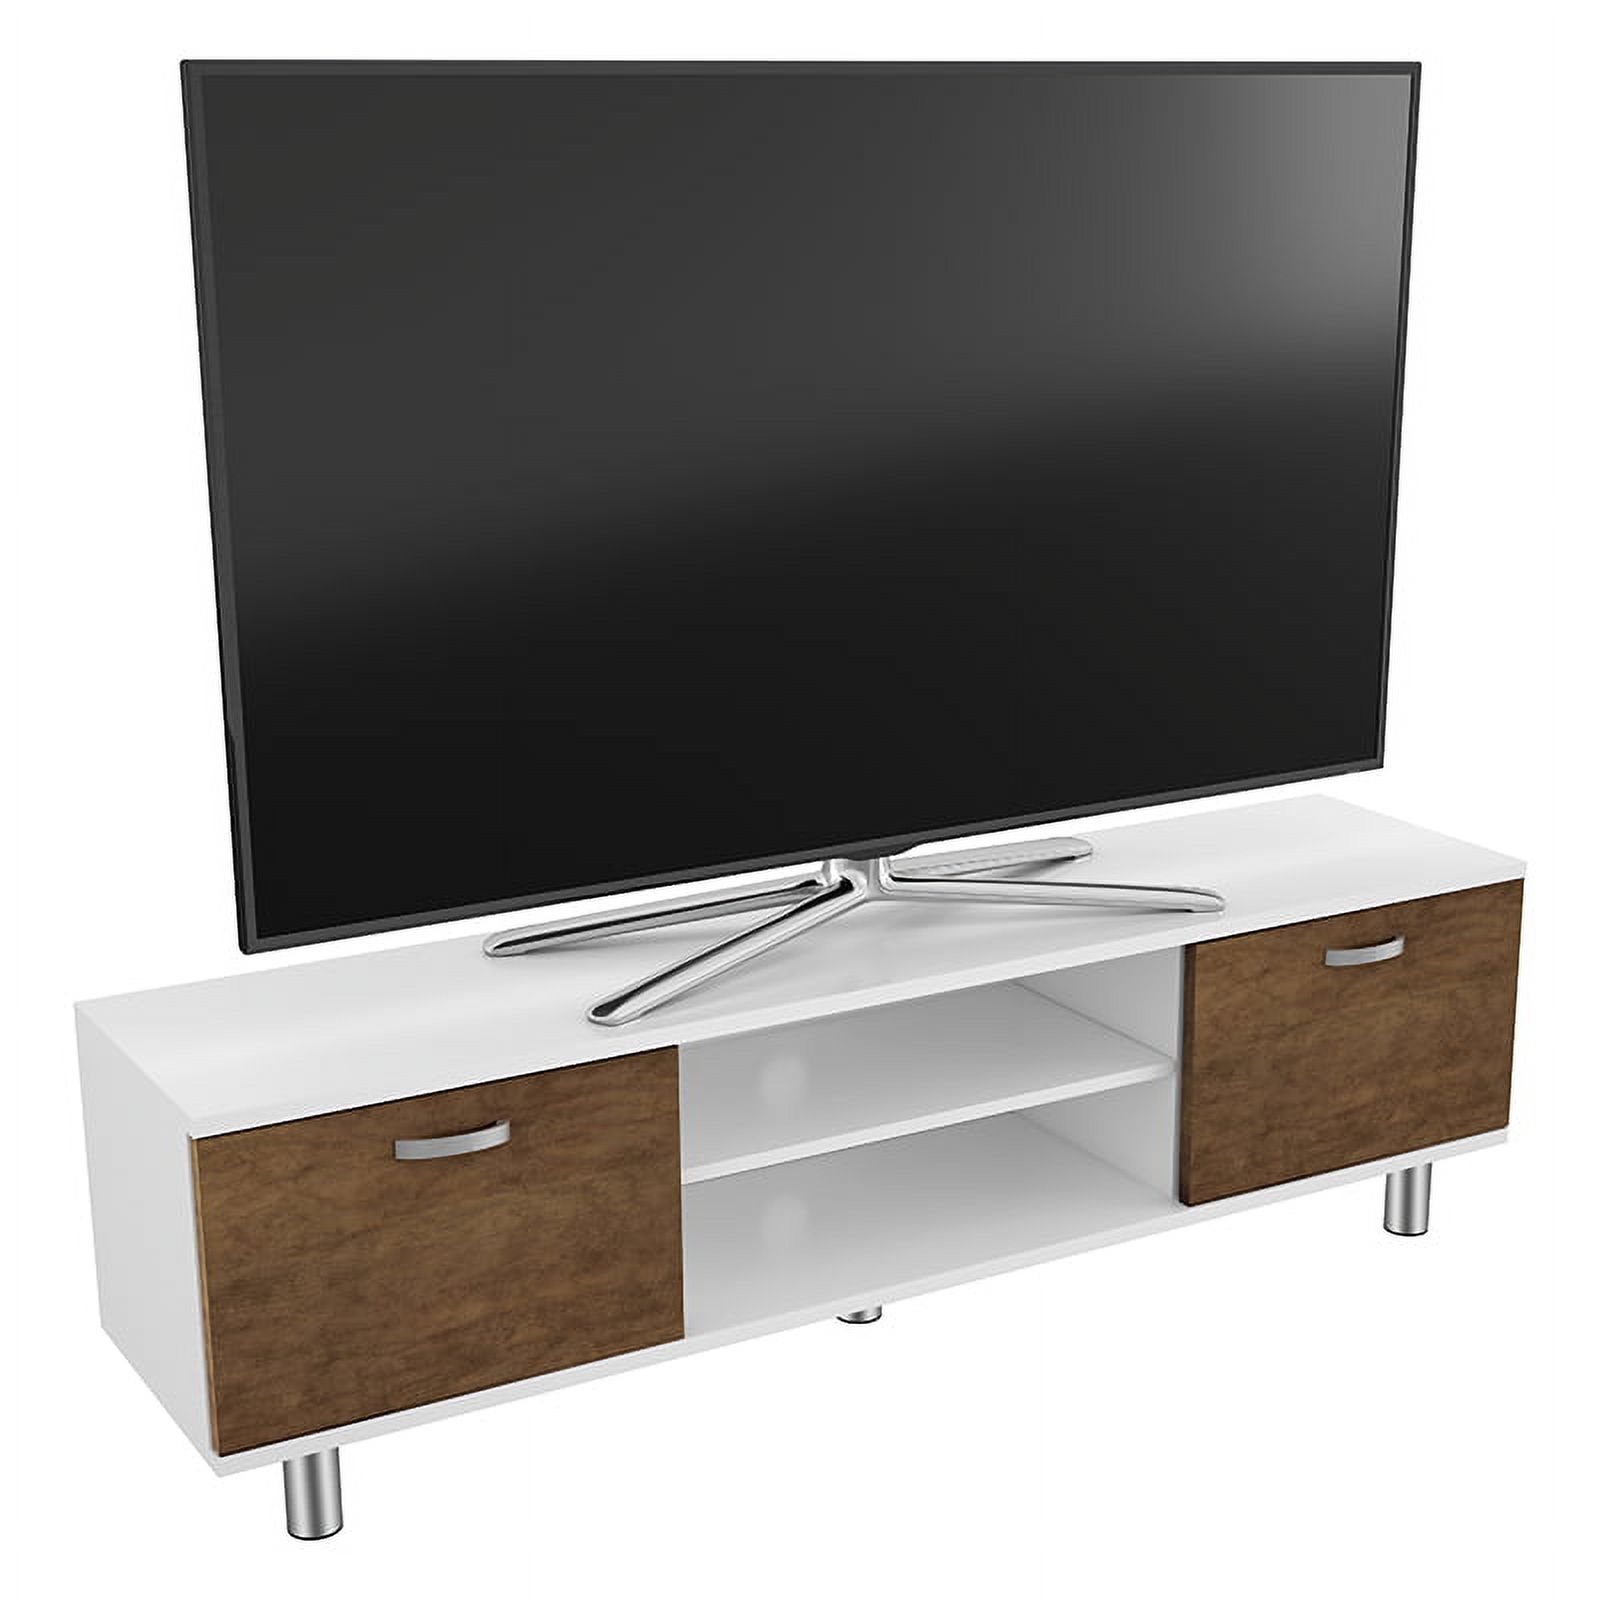 FS1500MAHW-A TV Stand for TVs 32”, 37”, 39”, 40”, 42”, 46”, 47”, 50”, 52”, 55”, 58”, 60”, 65”, White Finish, plus Walnut Finish Doors, Includes Cable Management. - image 3 of 3